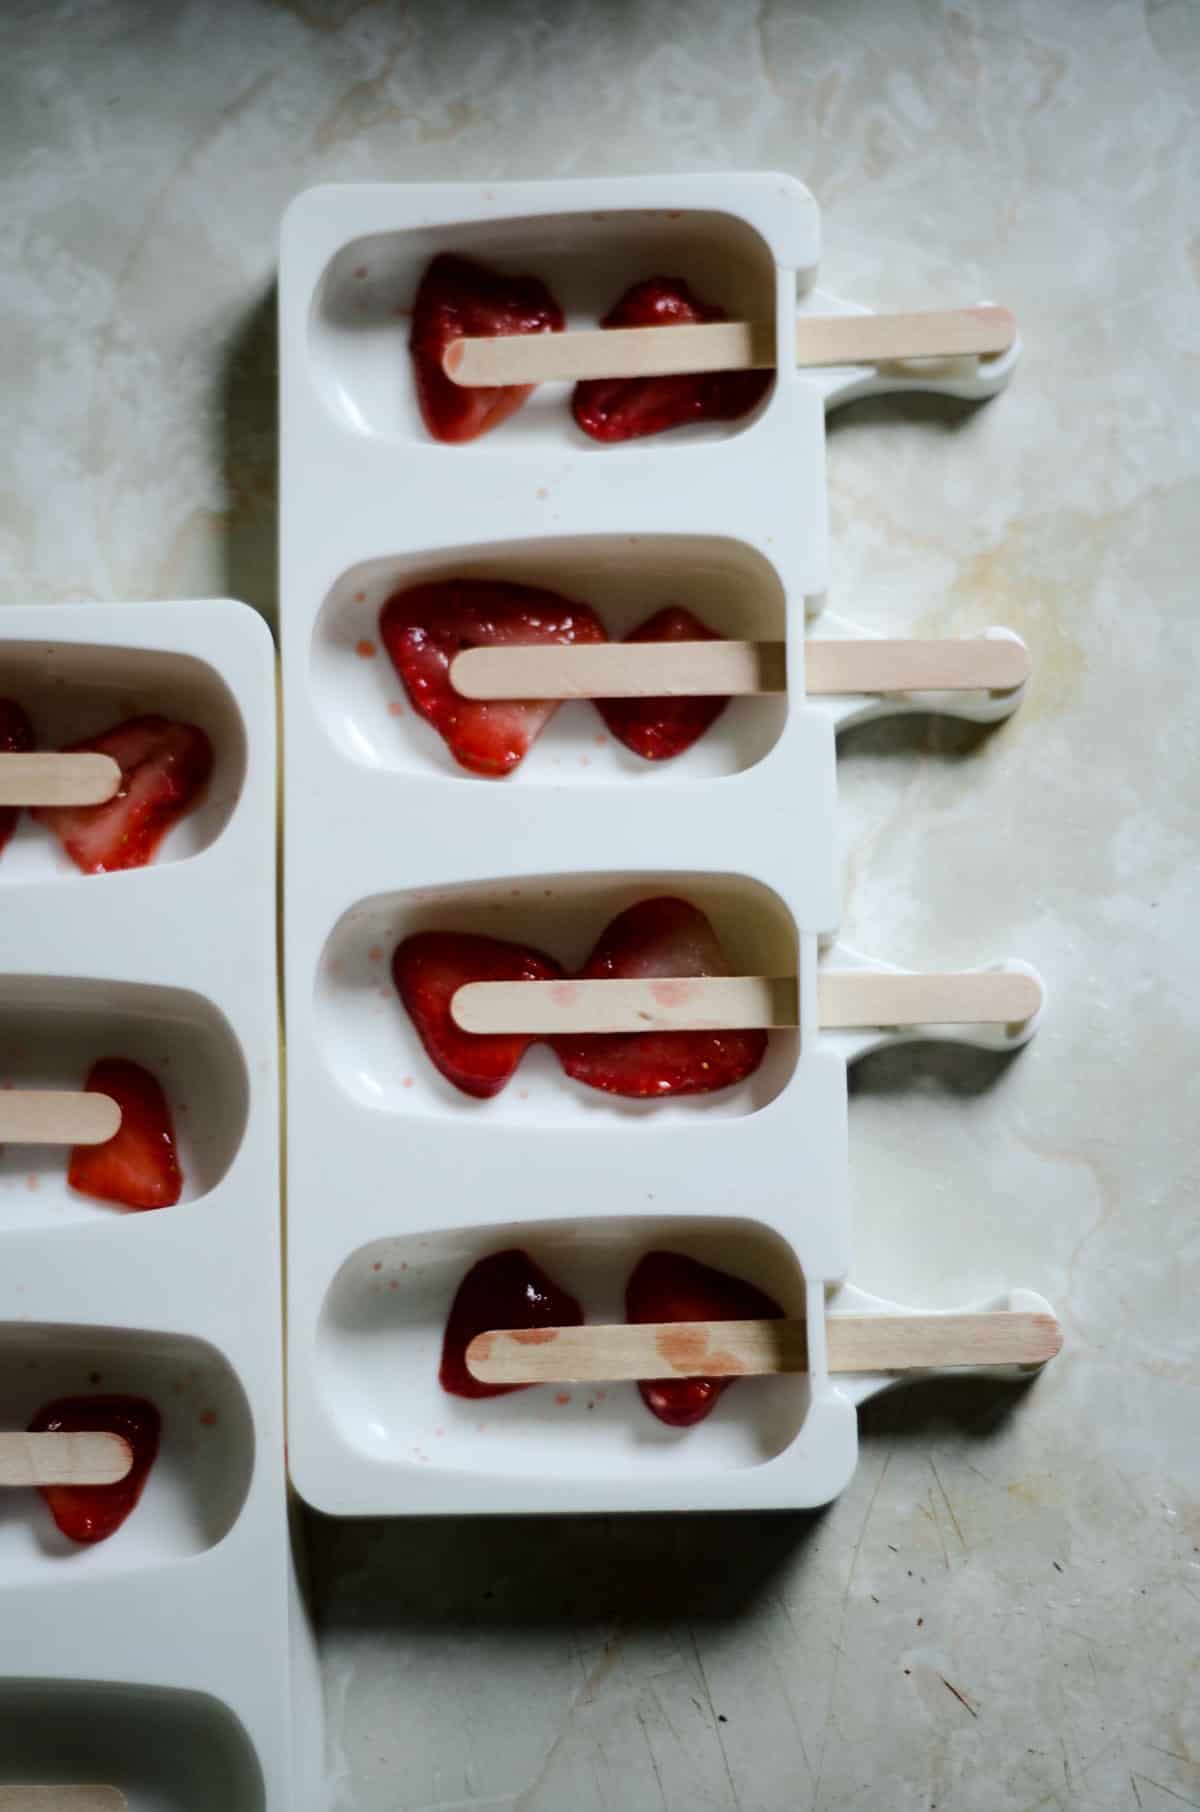 Strawberry Sliced in a silicone popsicle mold.